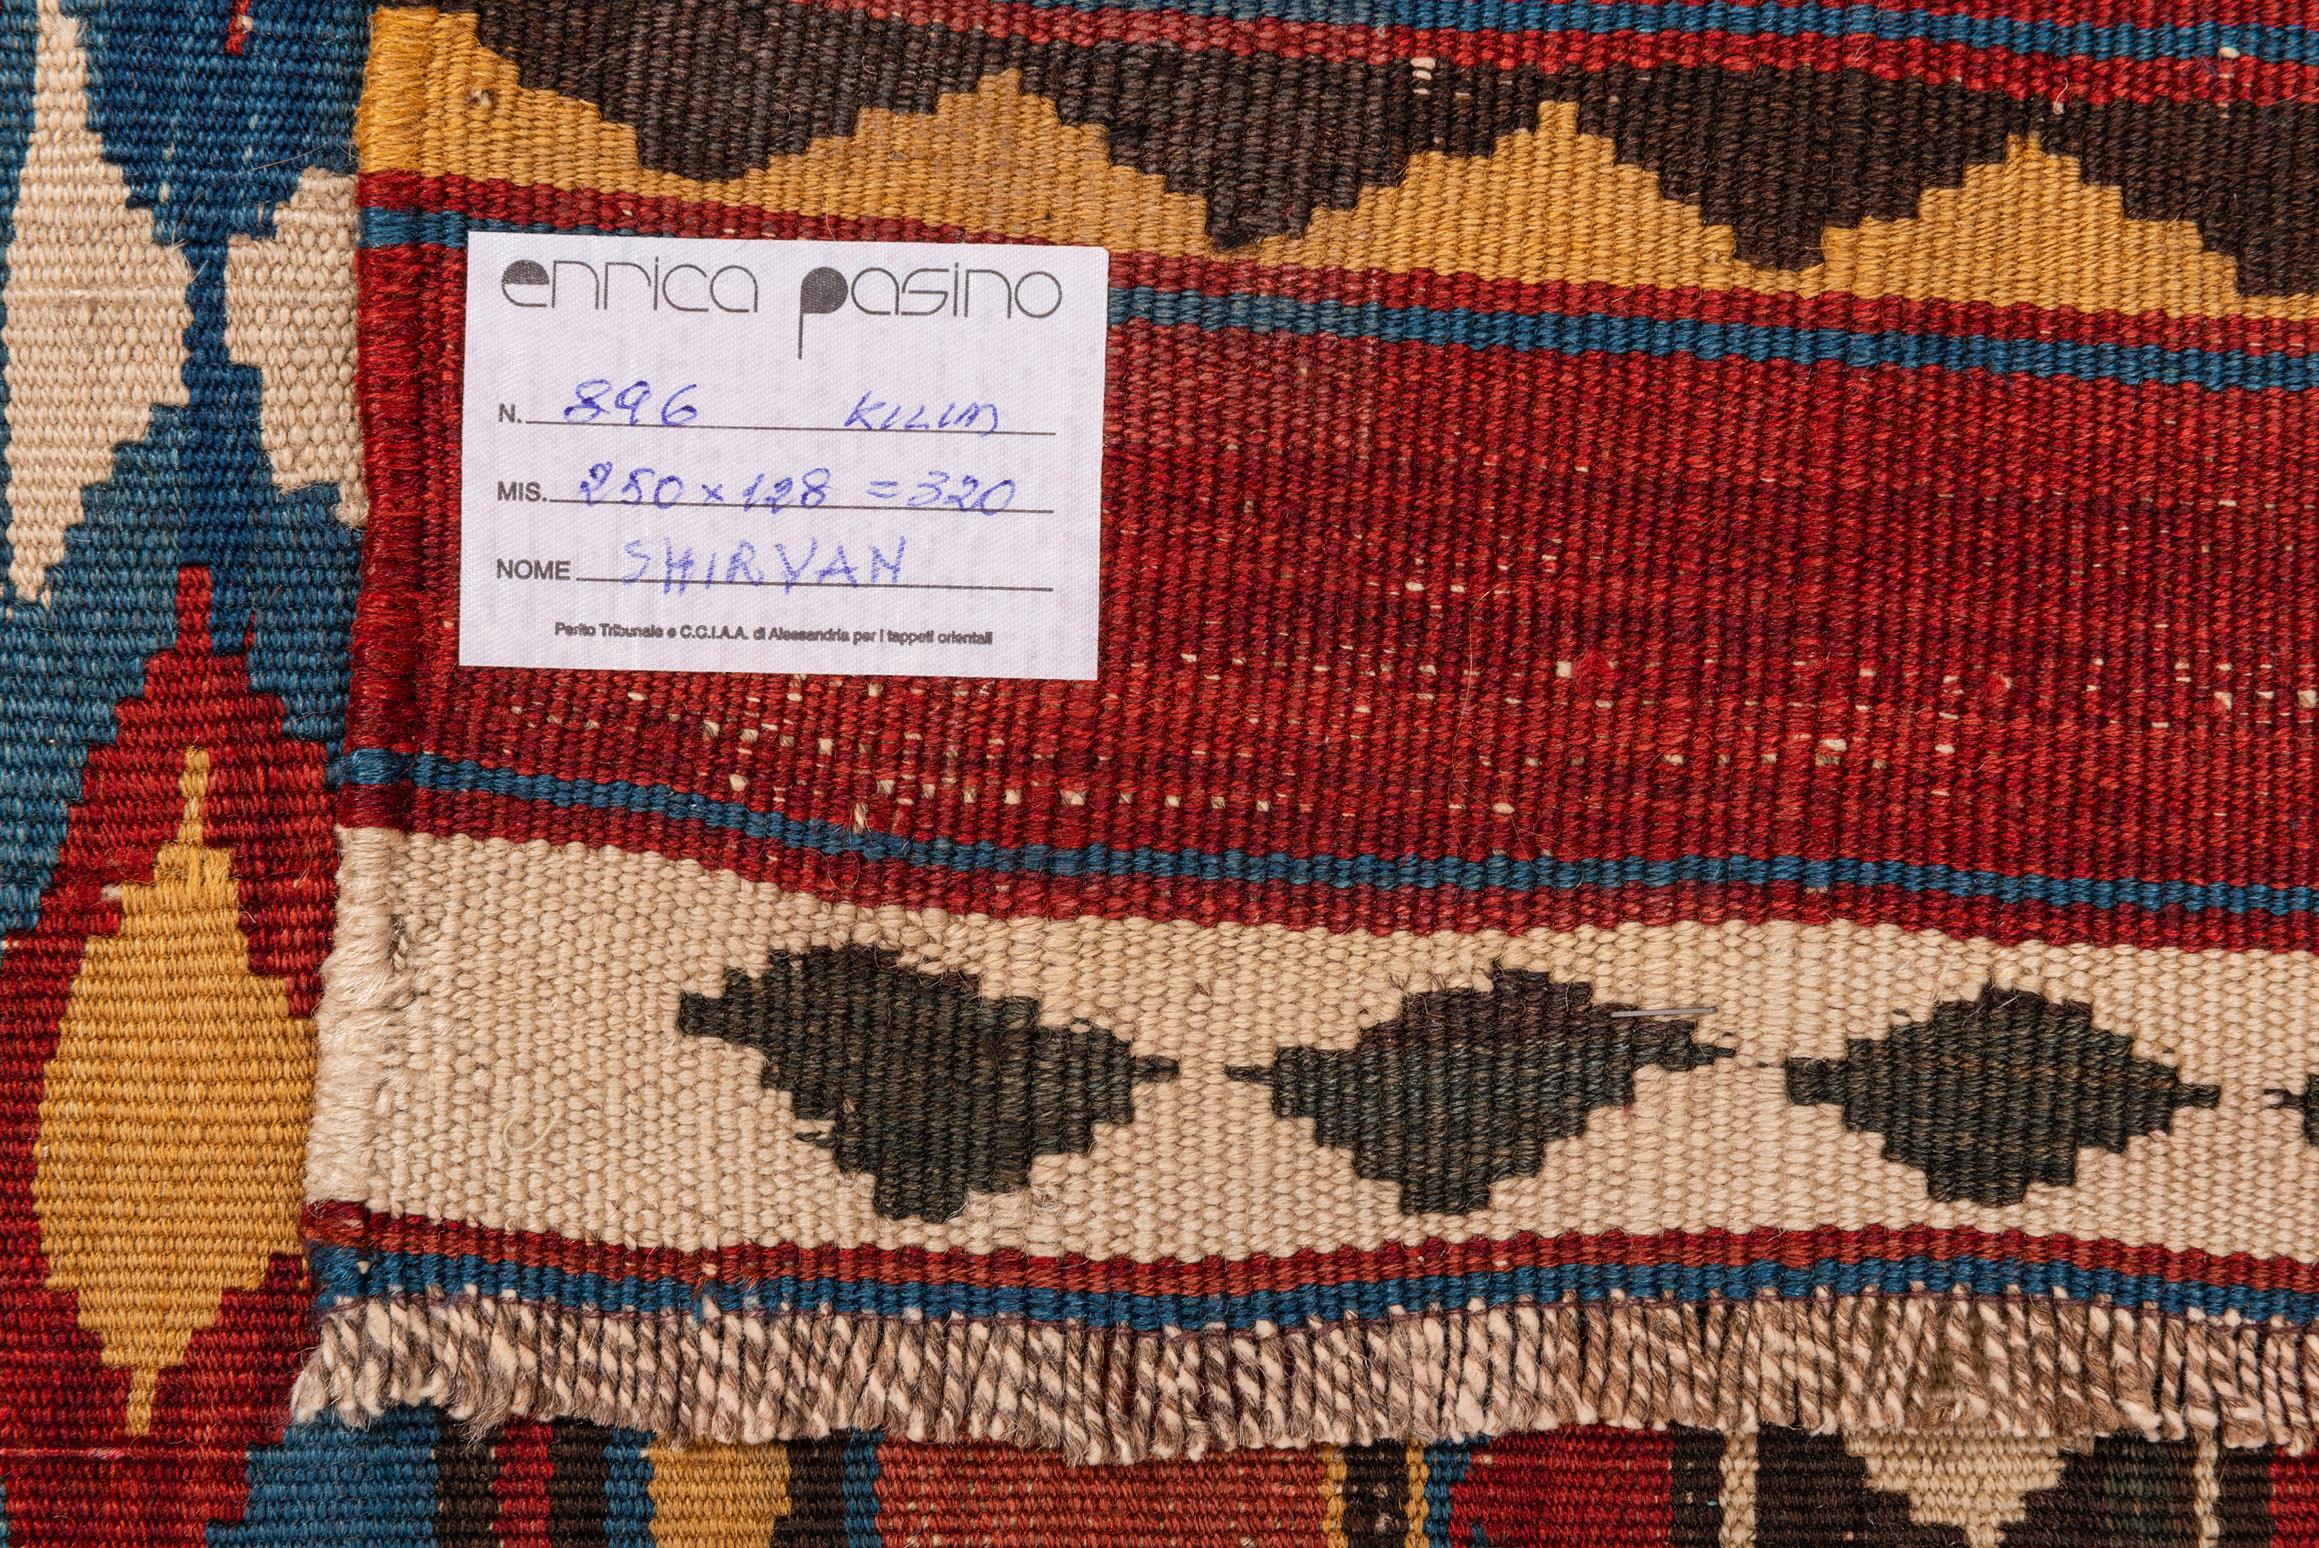  Beautiful Shirvan kilim with classical colors and dense workmanship: a rug that You can put everywhere, also resting on a larger modern rug
(an idea !) - Its price is good for closing activities.

Magazine nr. 896 -
  